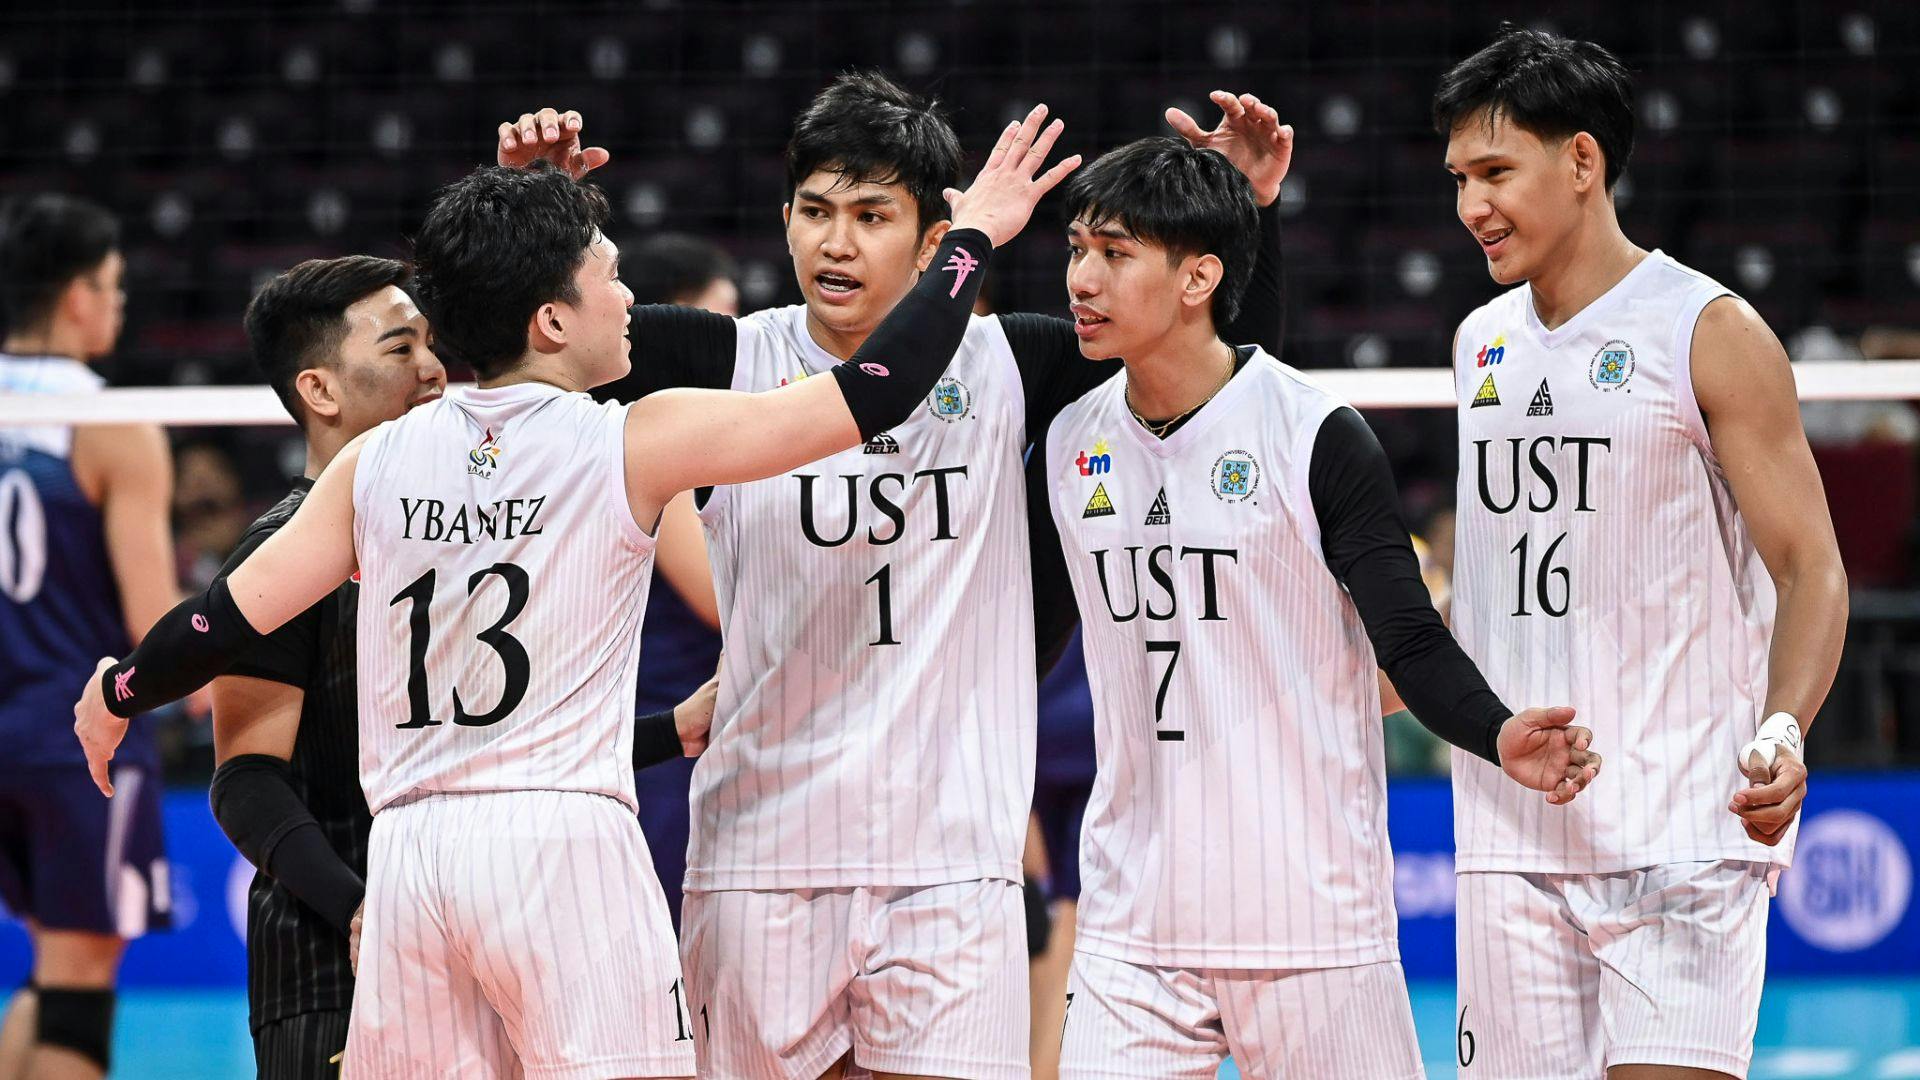 UAAP: UST holds off Adamson for back-to-back wins, NU makes quick work of UE in men